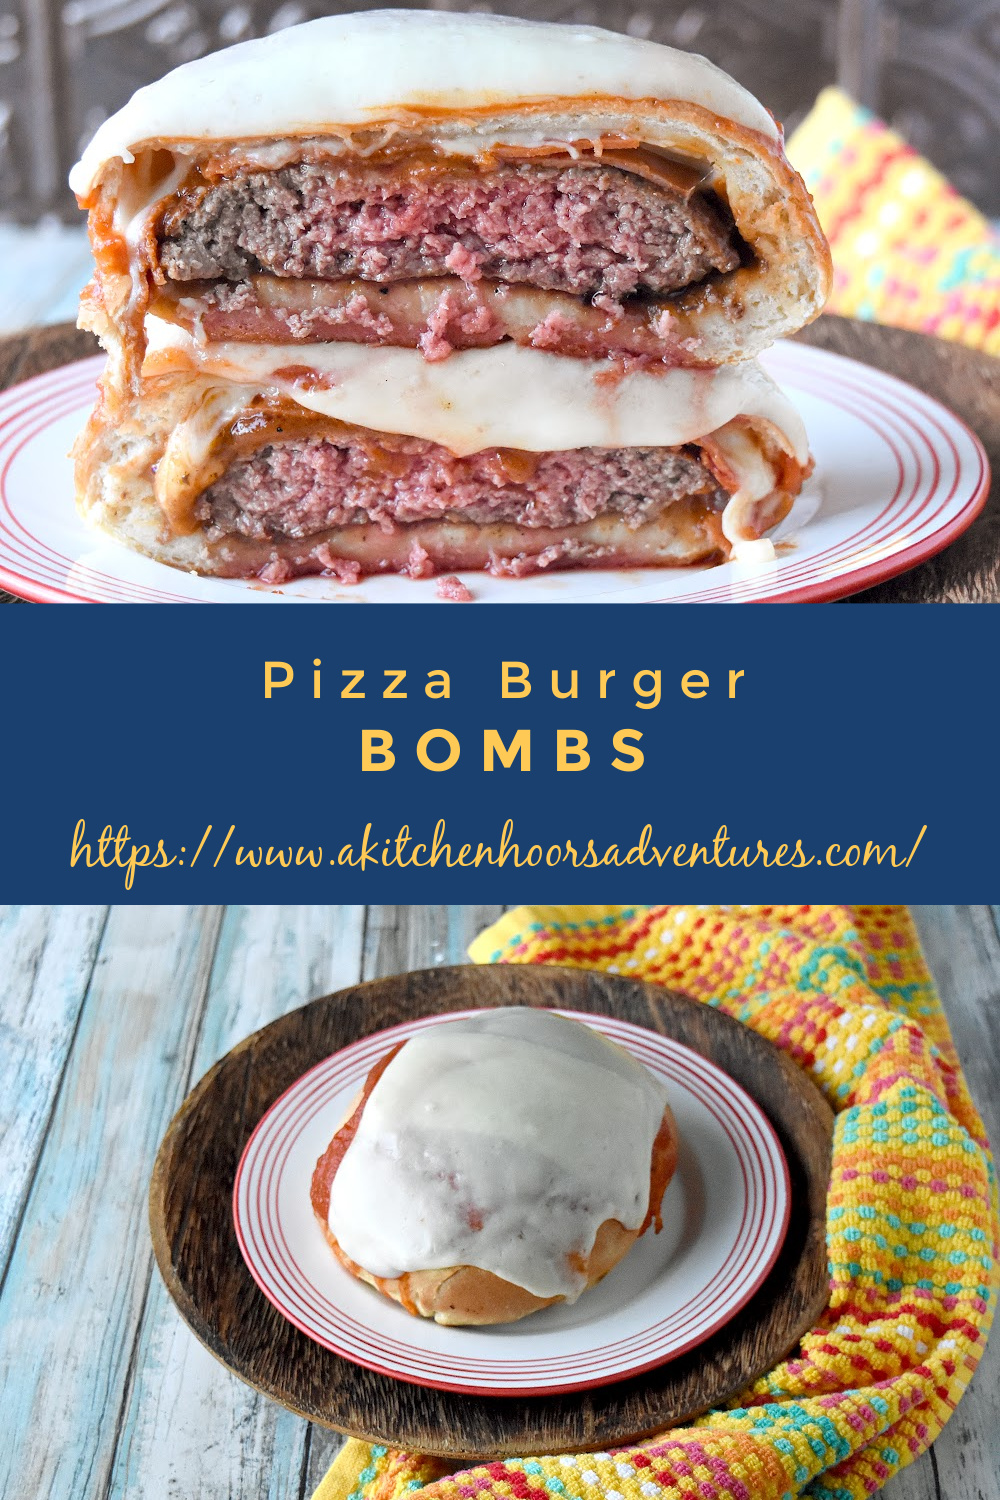 This Pizza Burger Bomb is layered with pizza flavors